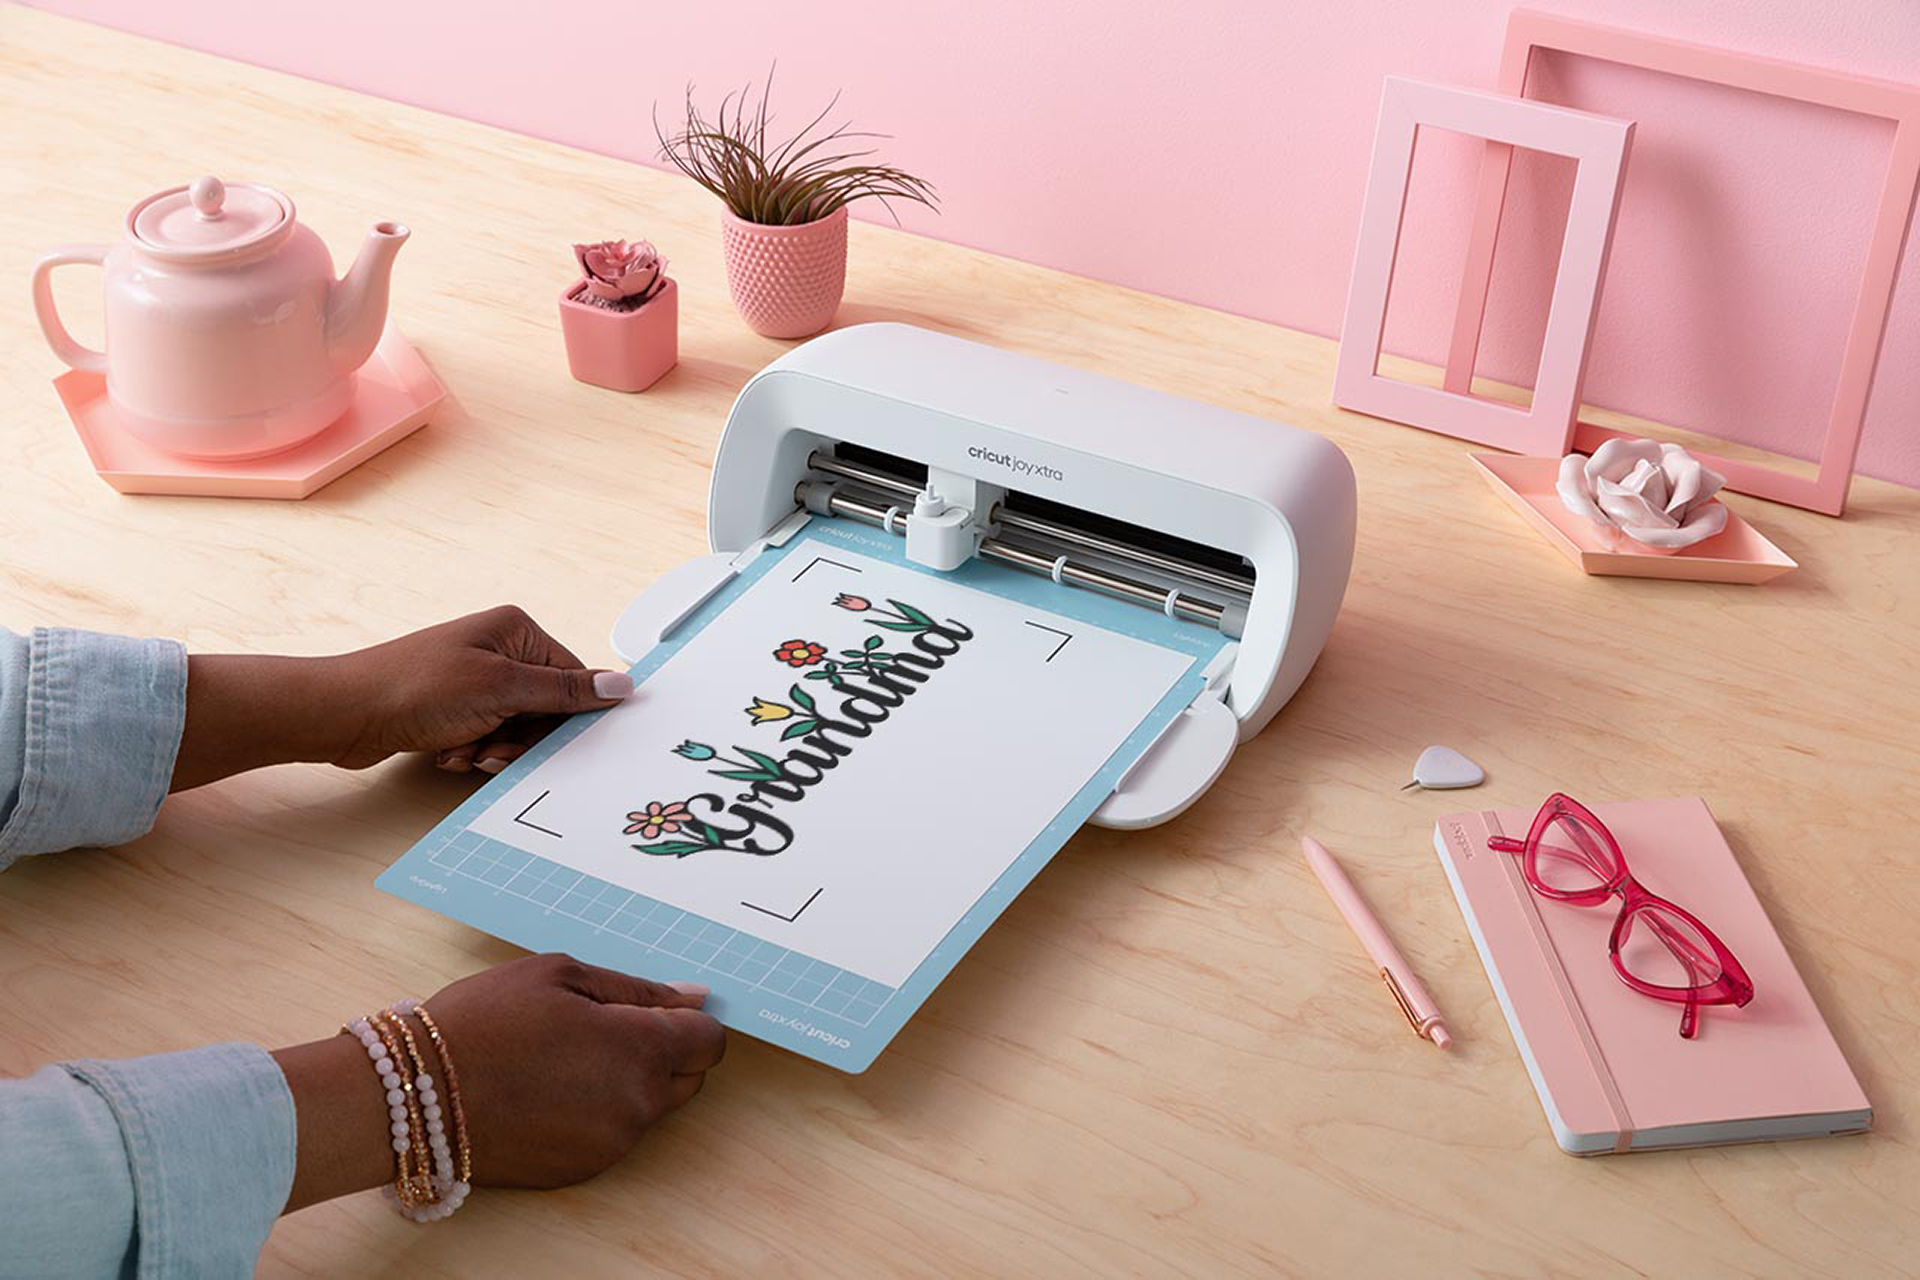 Cricut just launched the brand new Cricut Joy Xtra! ✨ This